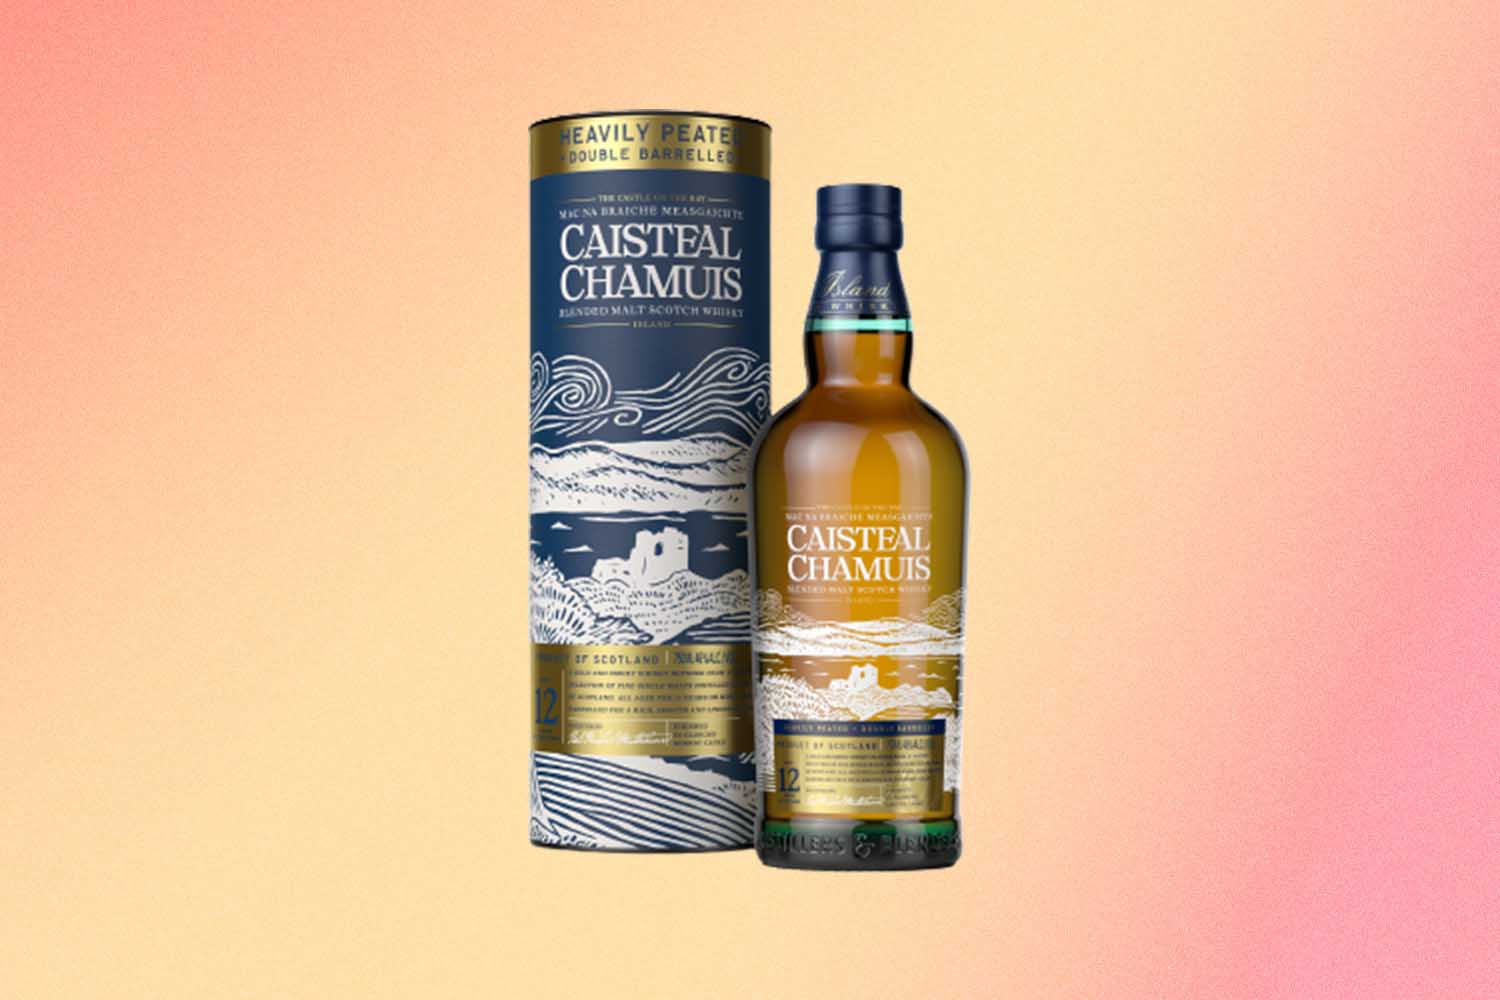 Caisteal Chamuis 12-Year-Old Blended Malt Scotch Whisky